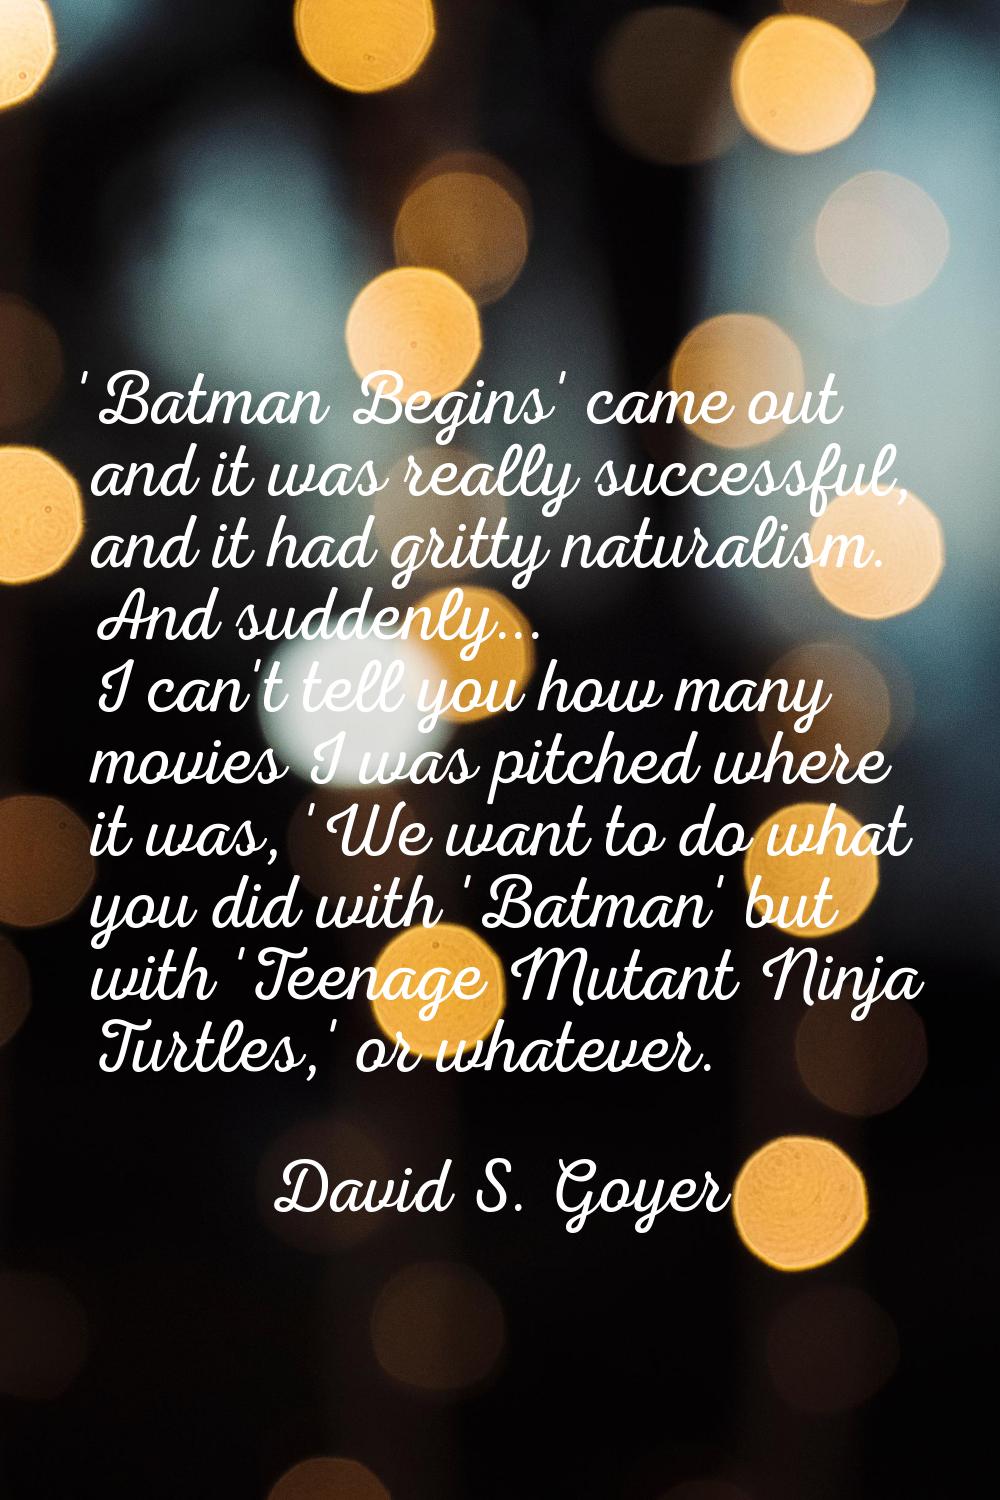 'Batman Begins' came out and it was really successful, and it had gritty naturalism. And suddenly..